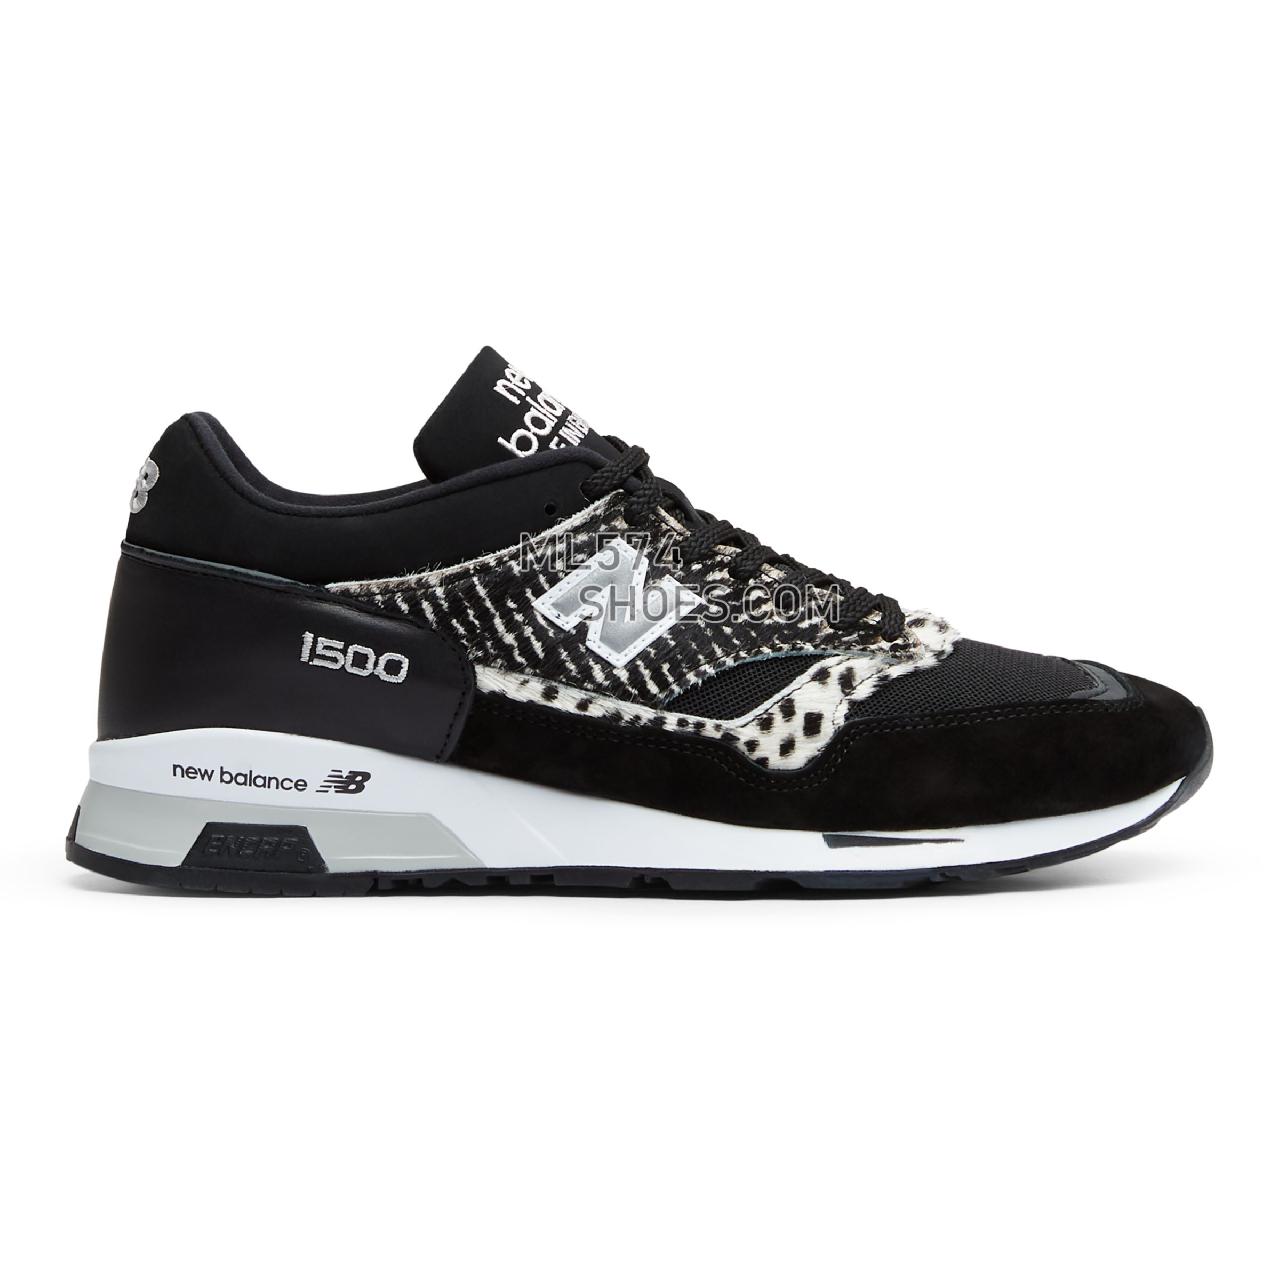 New Balance MADE in UK 1500 - Men's Made in USA And UK Sneakers - Black with White and Silver - M1500ZDK